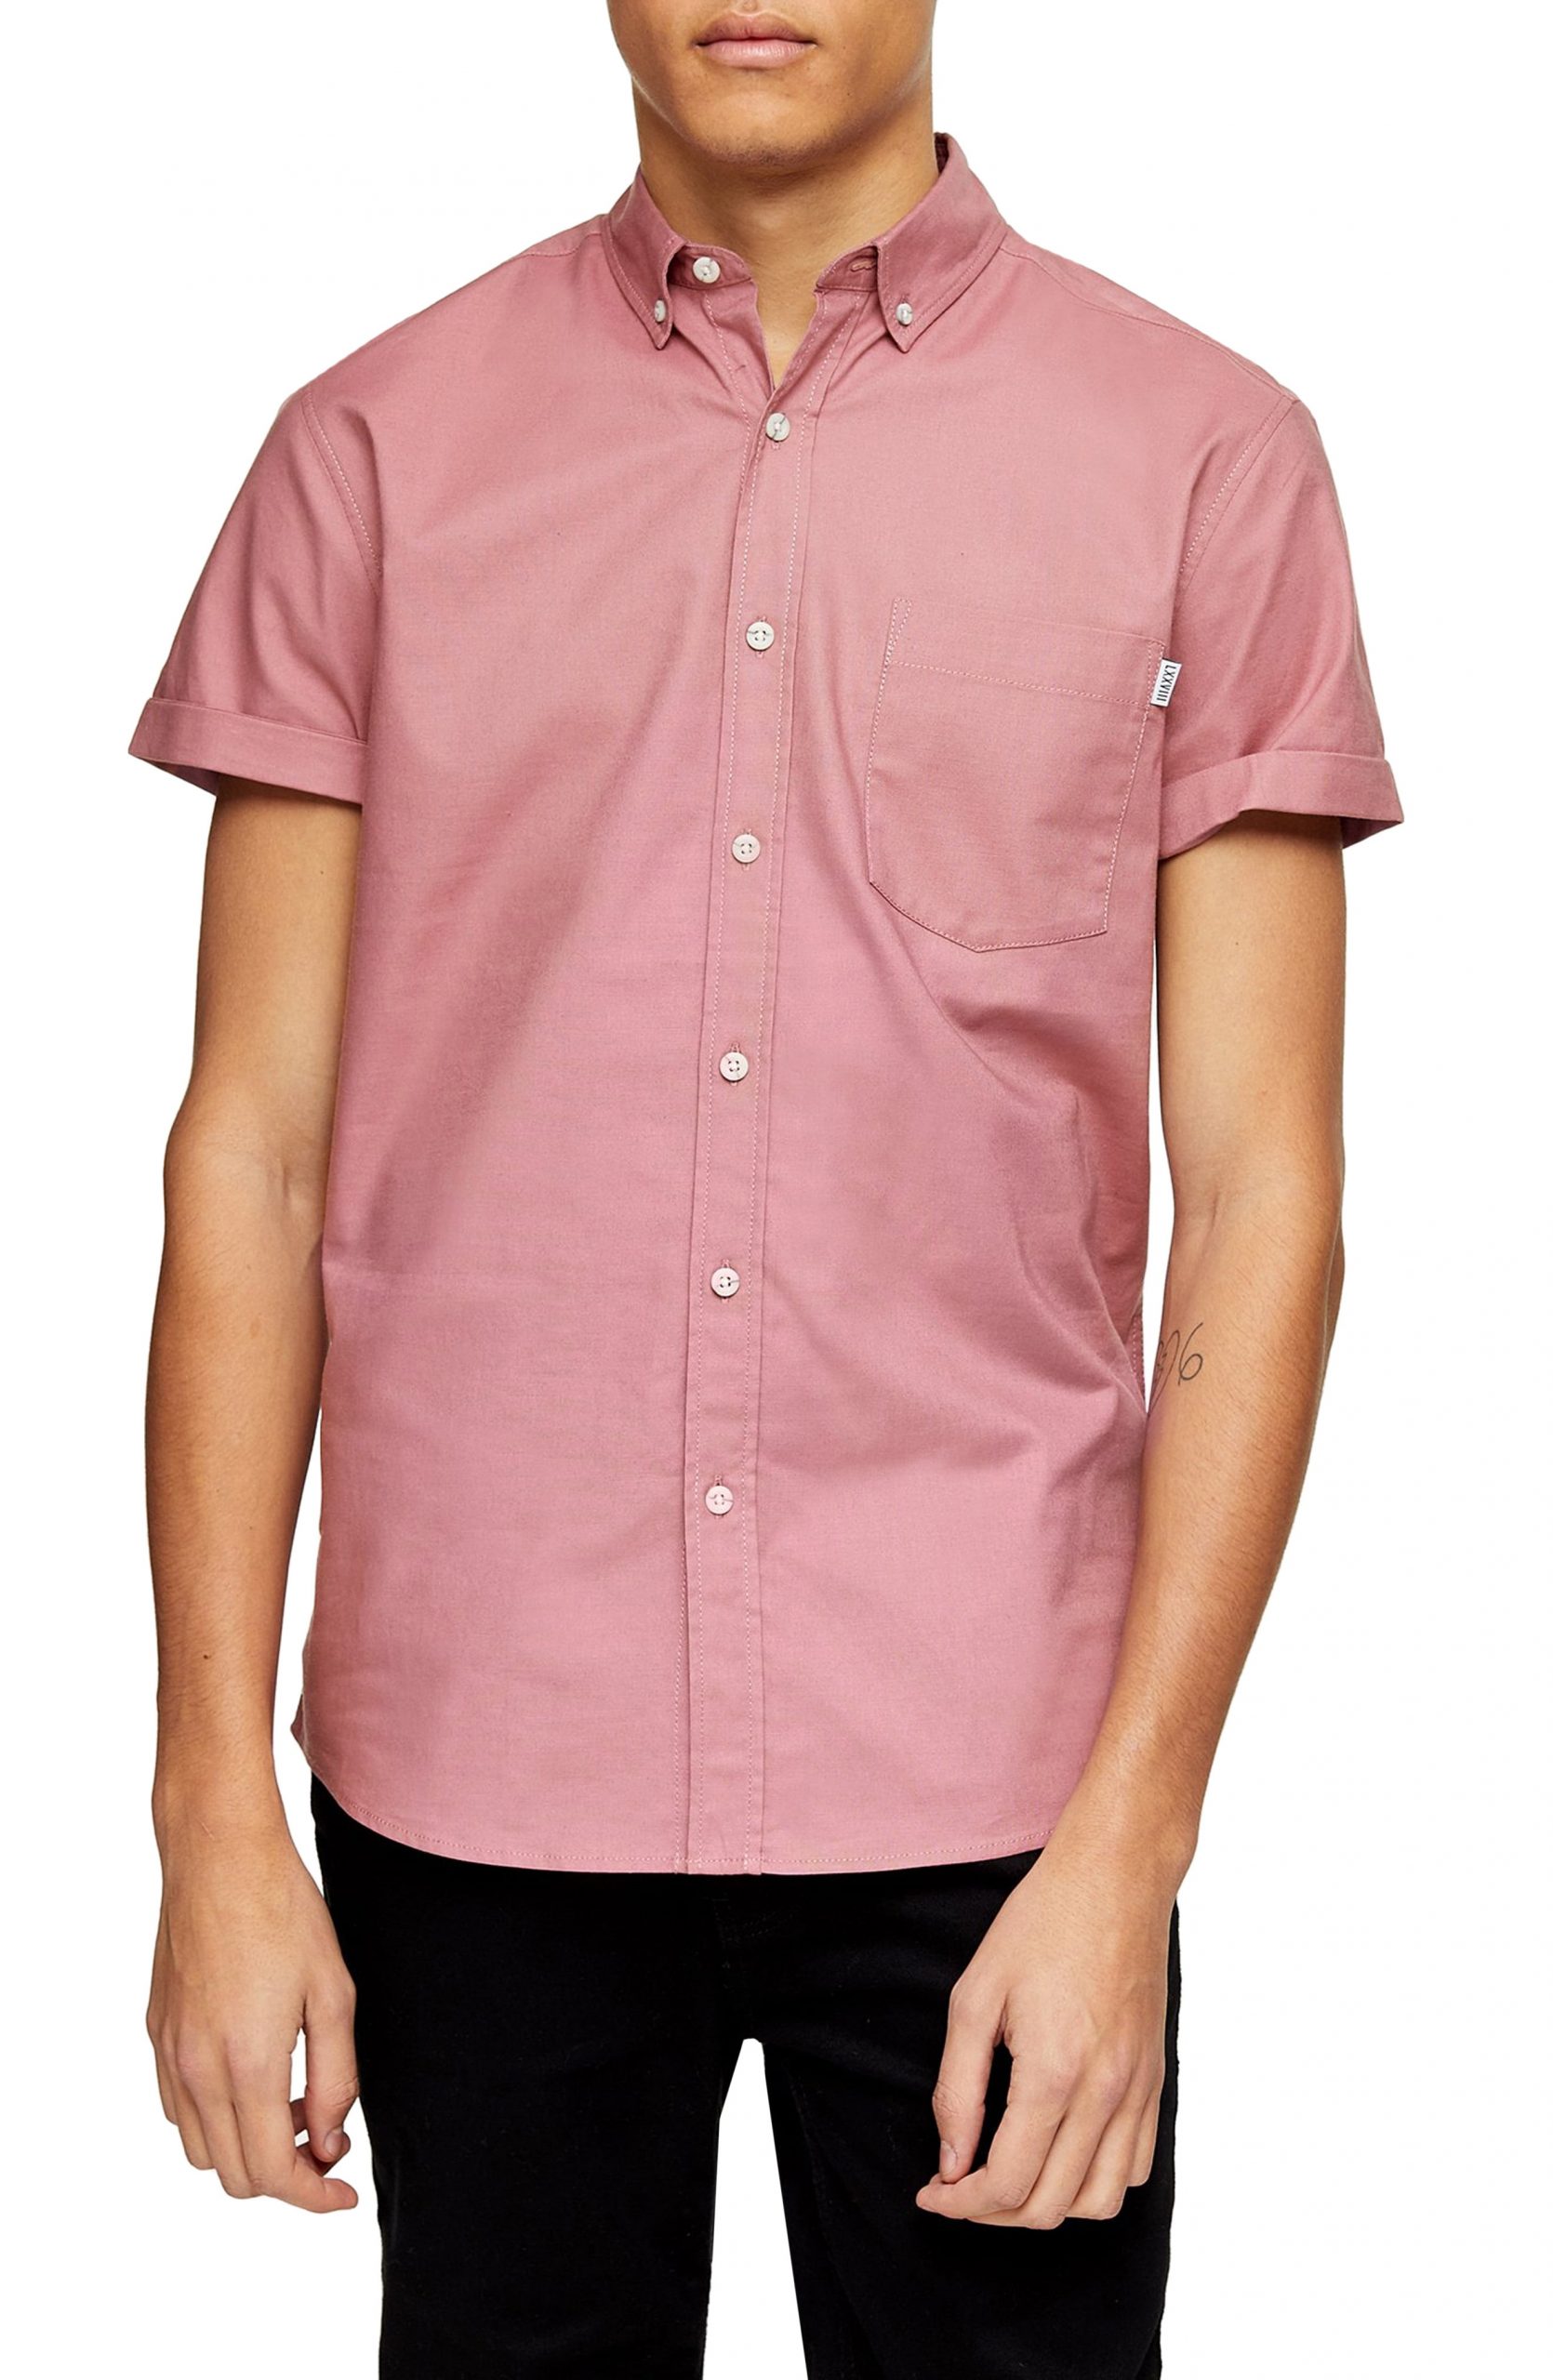 Men’s Topman Solid Short Sleeve Button-Down Shirt, Size Small - Pink ...